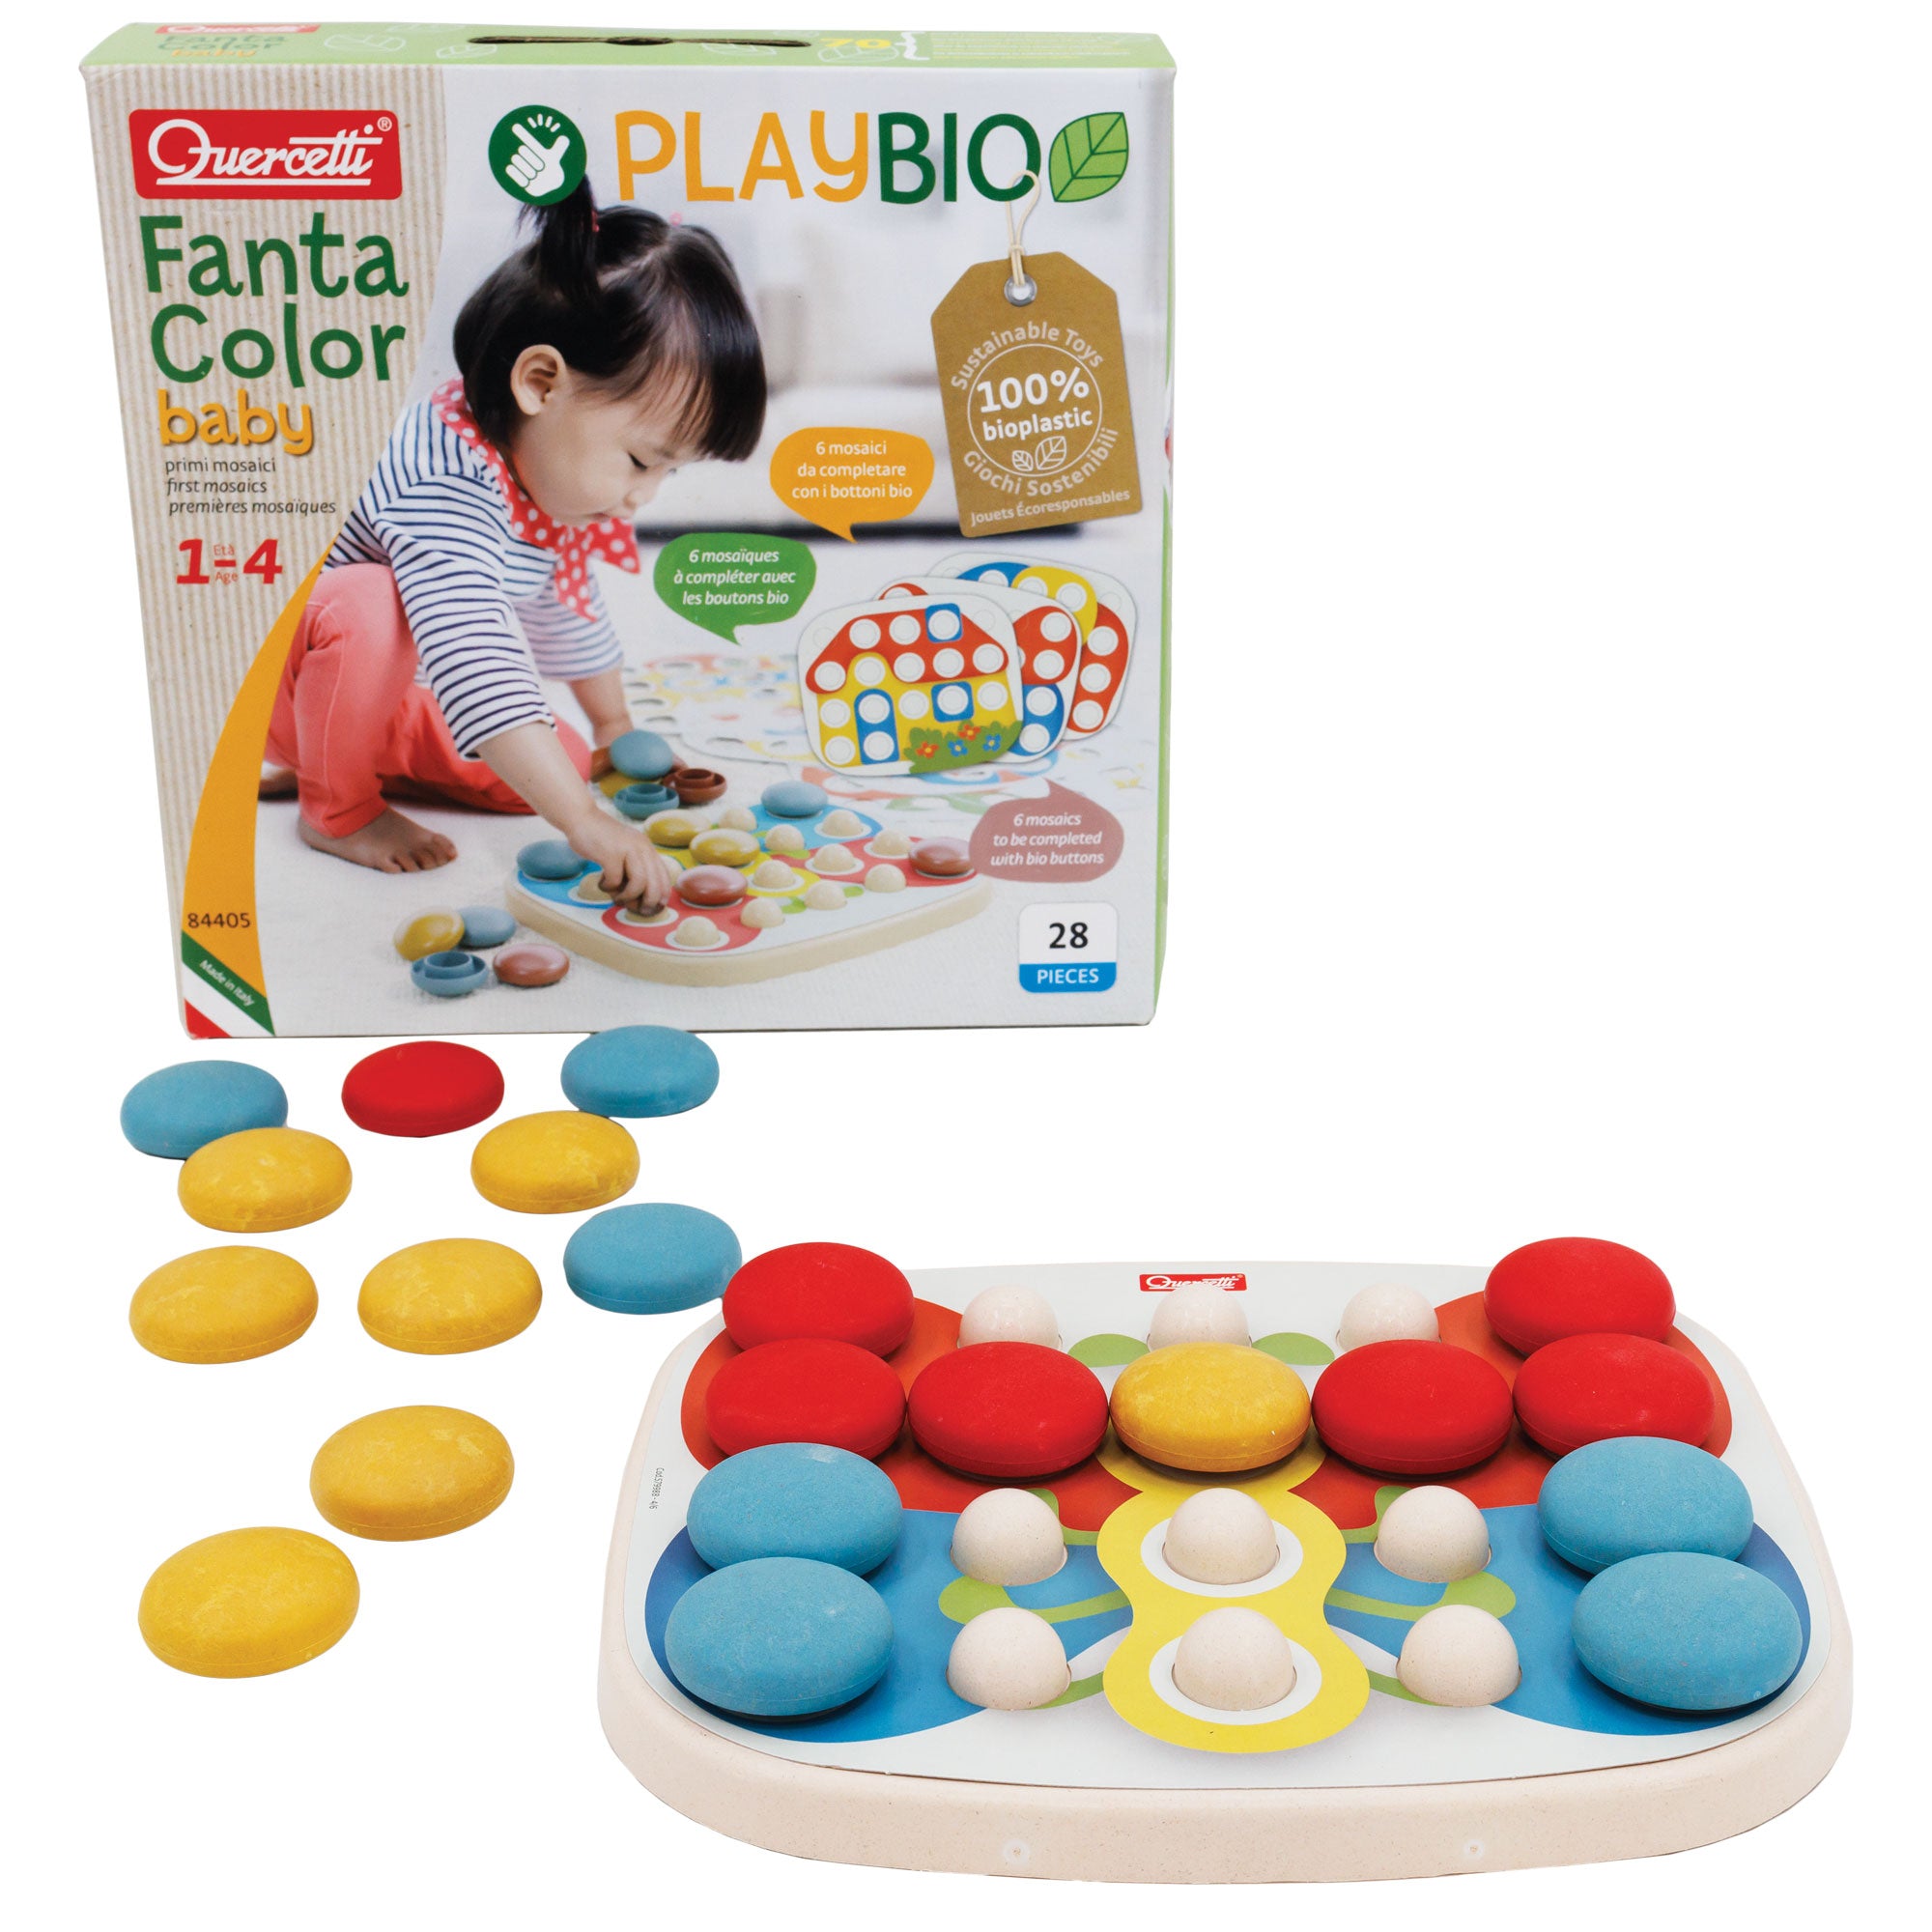 Quercetti Fanta Color Baby setup with a butterfly picture placed over pegs and the round pieces placed on top of some of the pegs. On left side are several round pieces. The pieces are red, yellow, and blue. In the background is the product box with a black-haired baby on the cover playing with the butterfly puzzle.